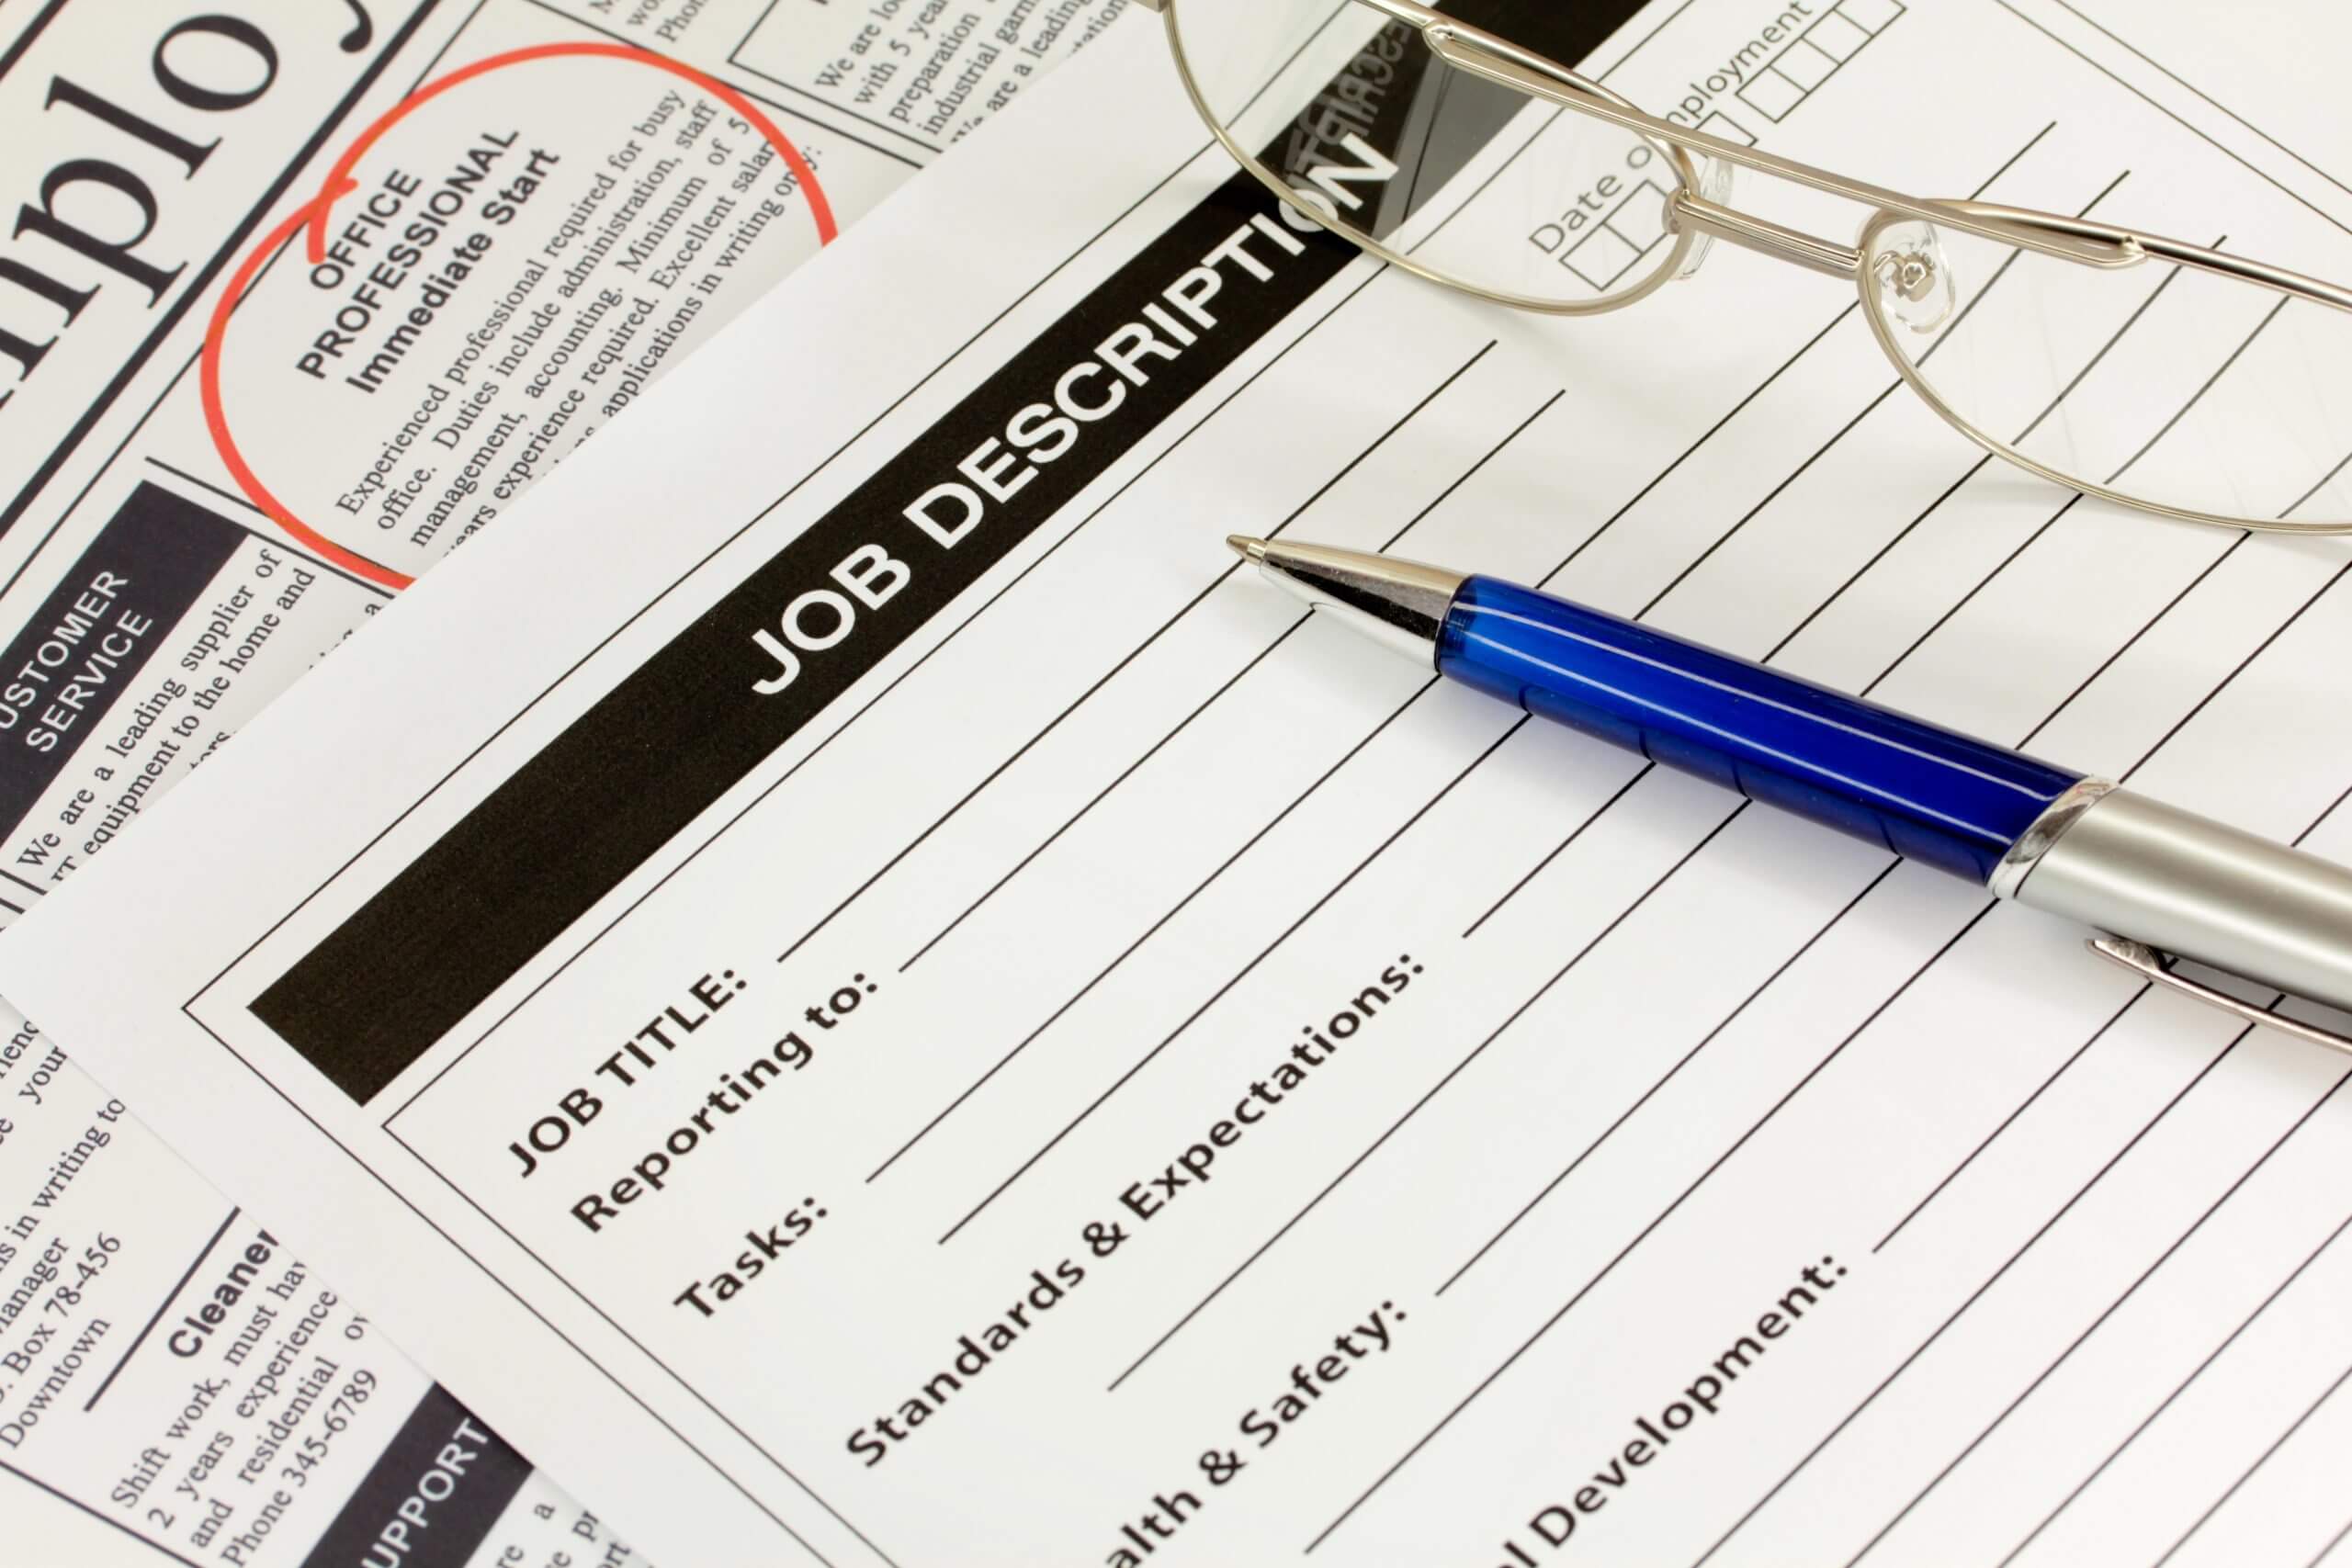 Saying Entry Level When You Really Mean 2-3 Years’ Experience? 4 Ways to Create More Compelling Job Descriptions